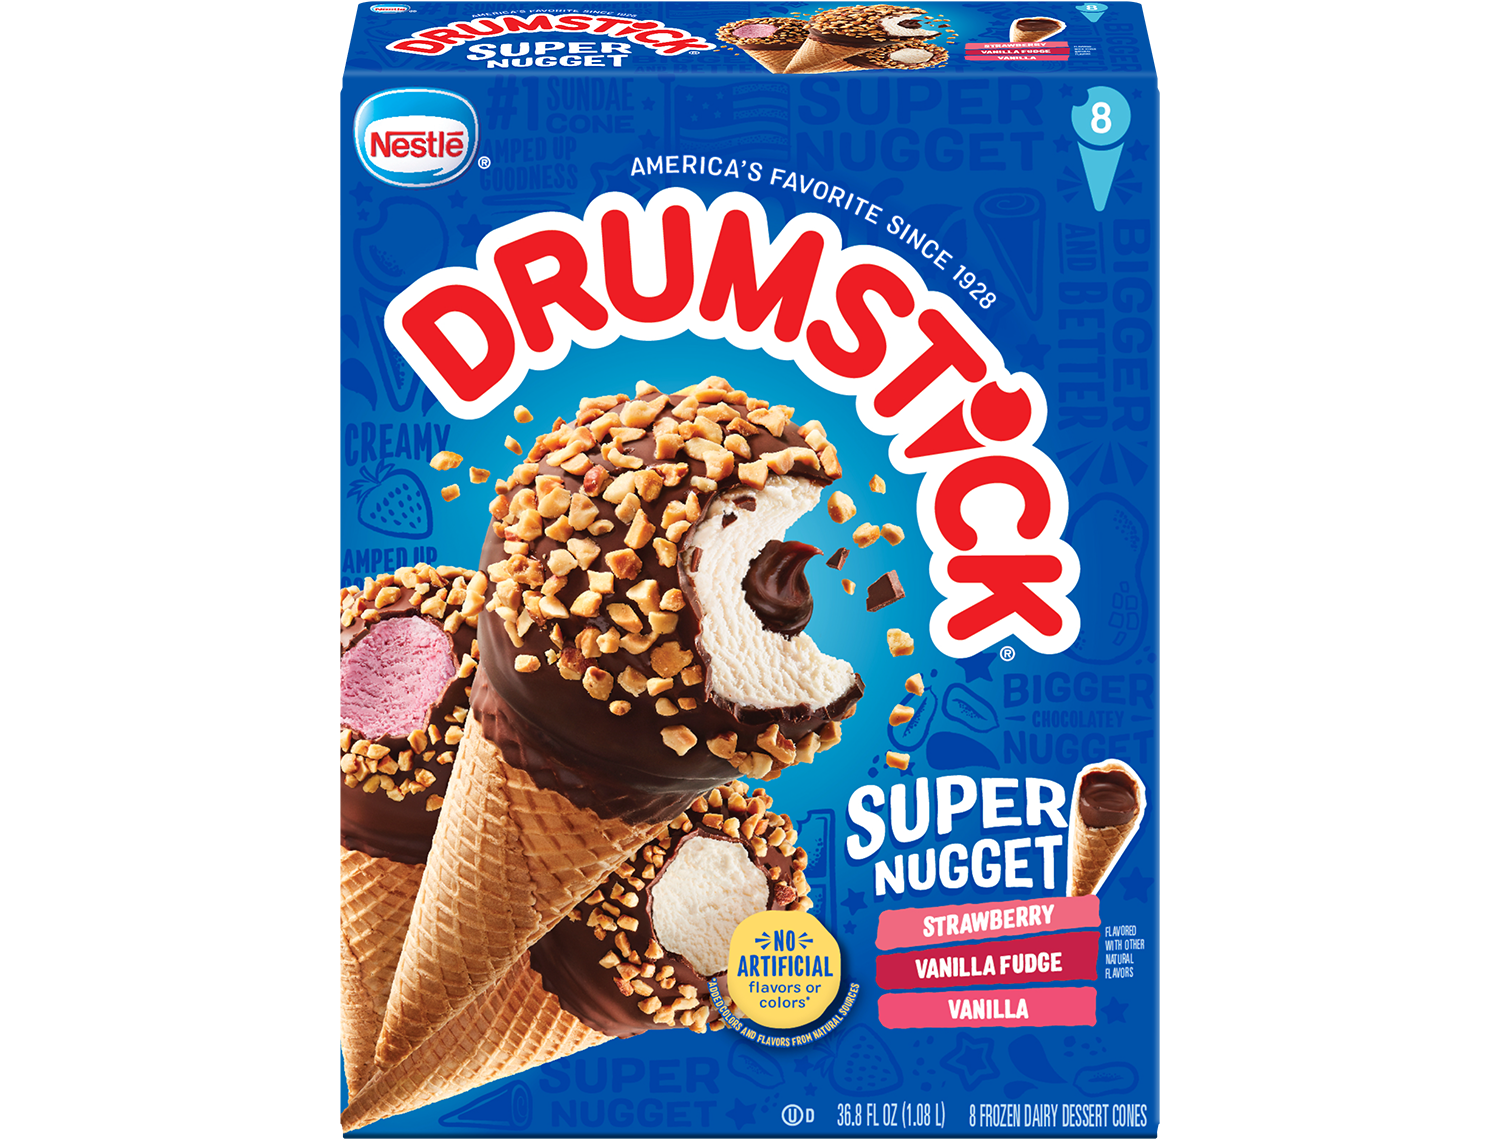 Photo of Drumstick Super Nugget pack in retail packaging.